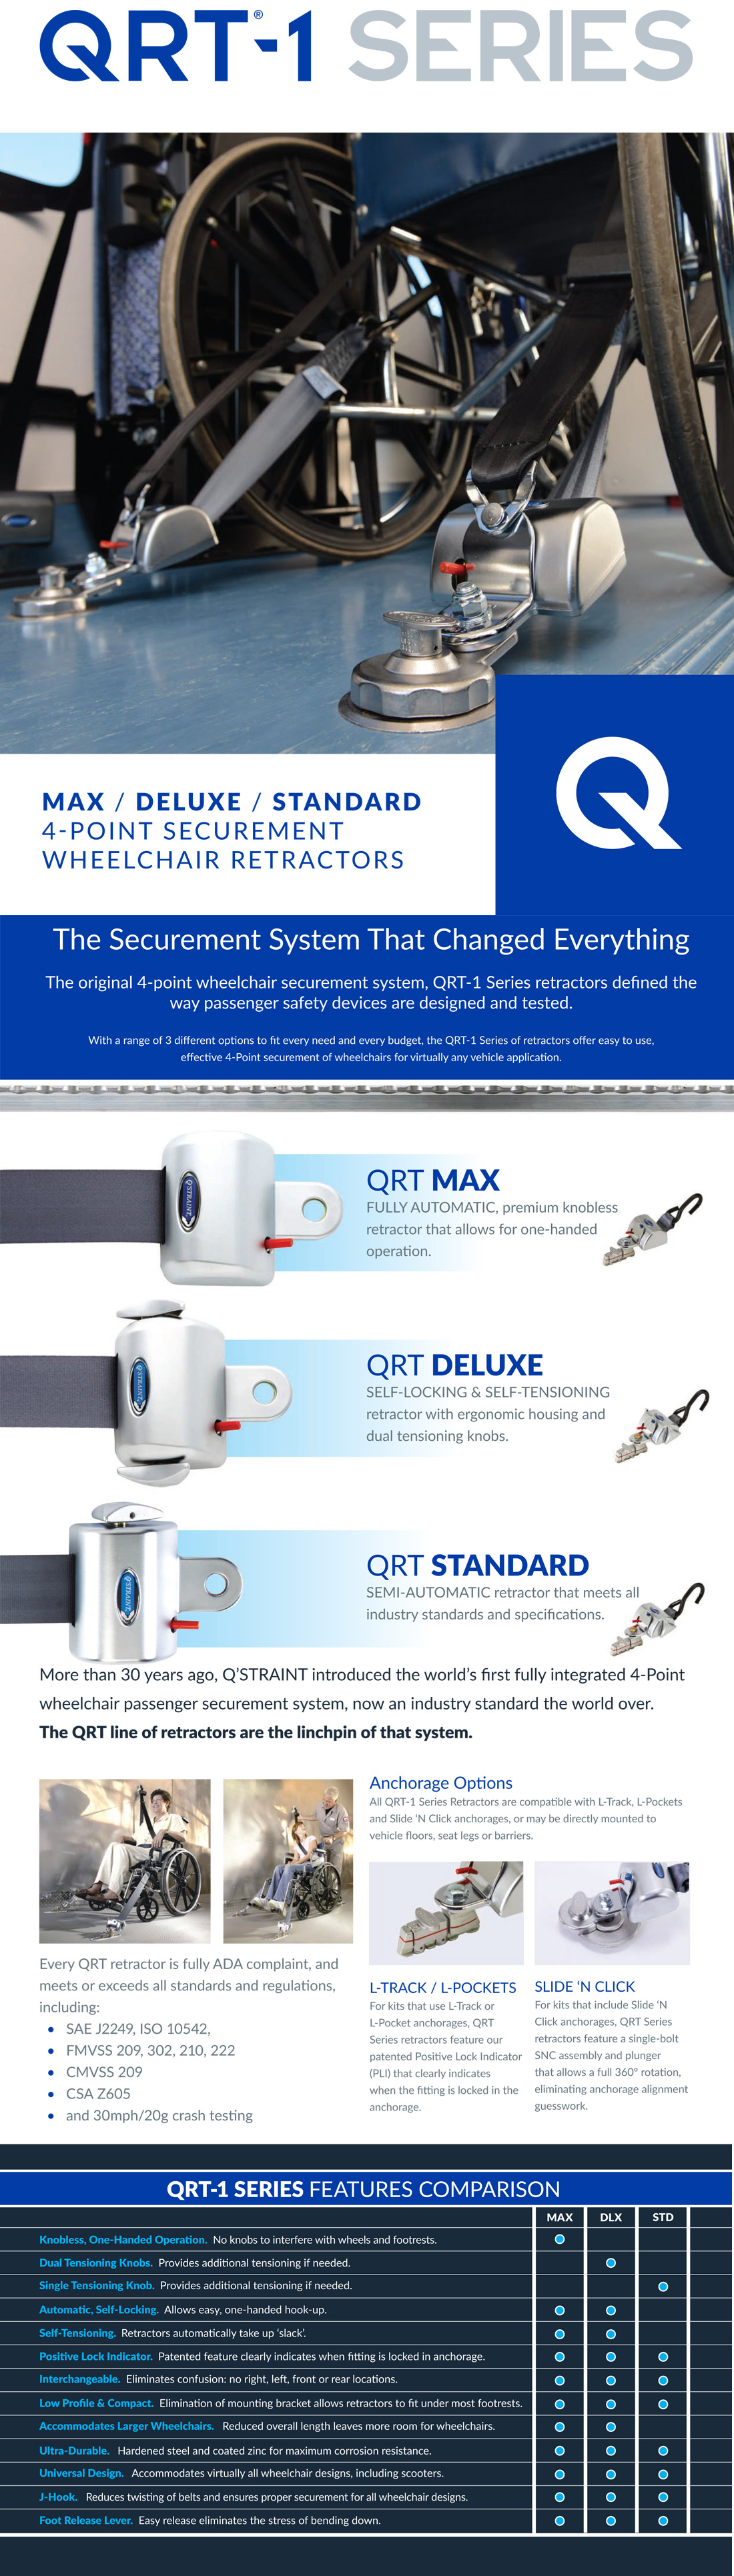 The original 4-point wheelchair securement system, QRT-1 Series retractors defined the way passenger safety devices are designed and tested.